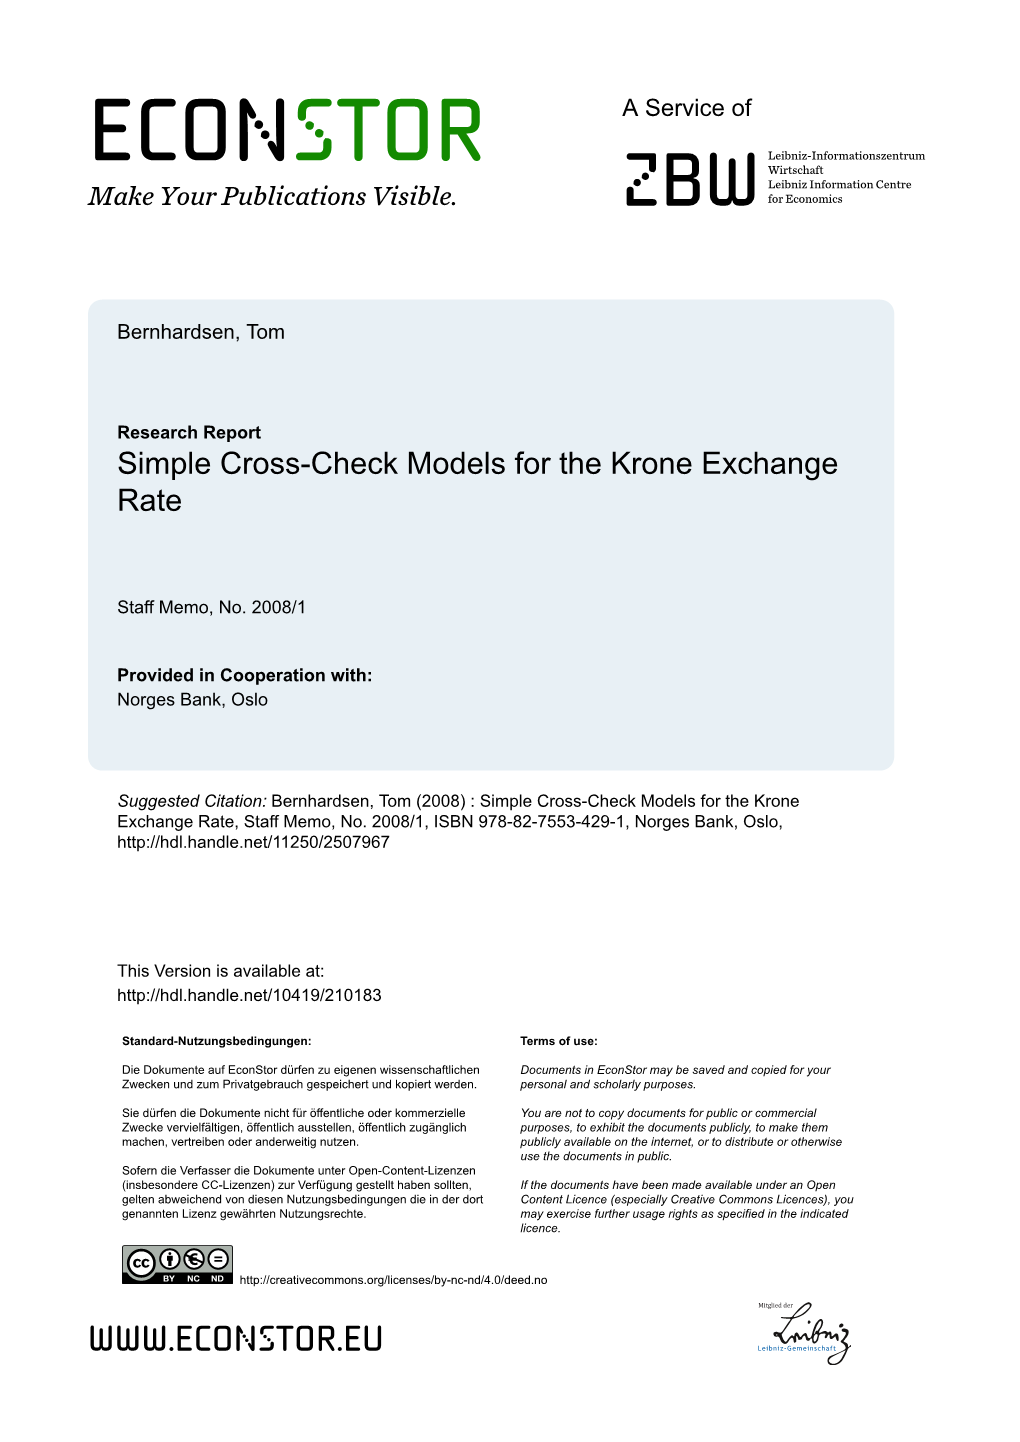 Simple Cross-Check Models for the Krone Exchange Rate